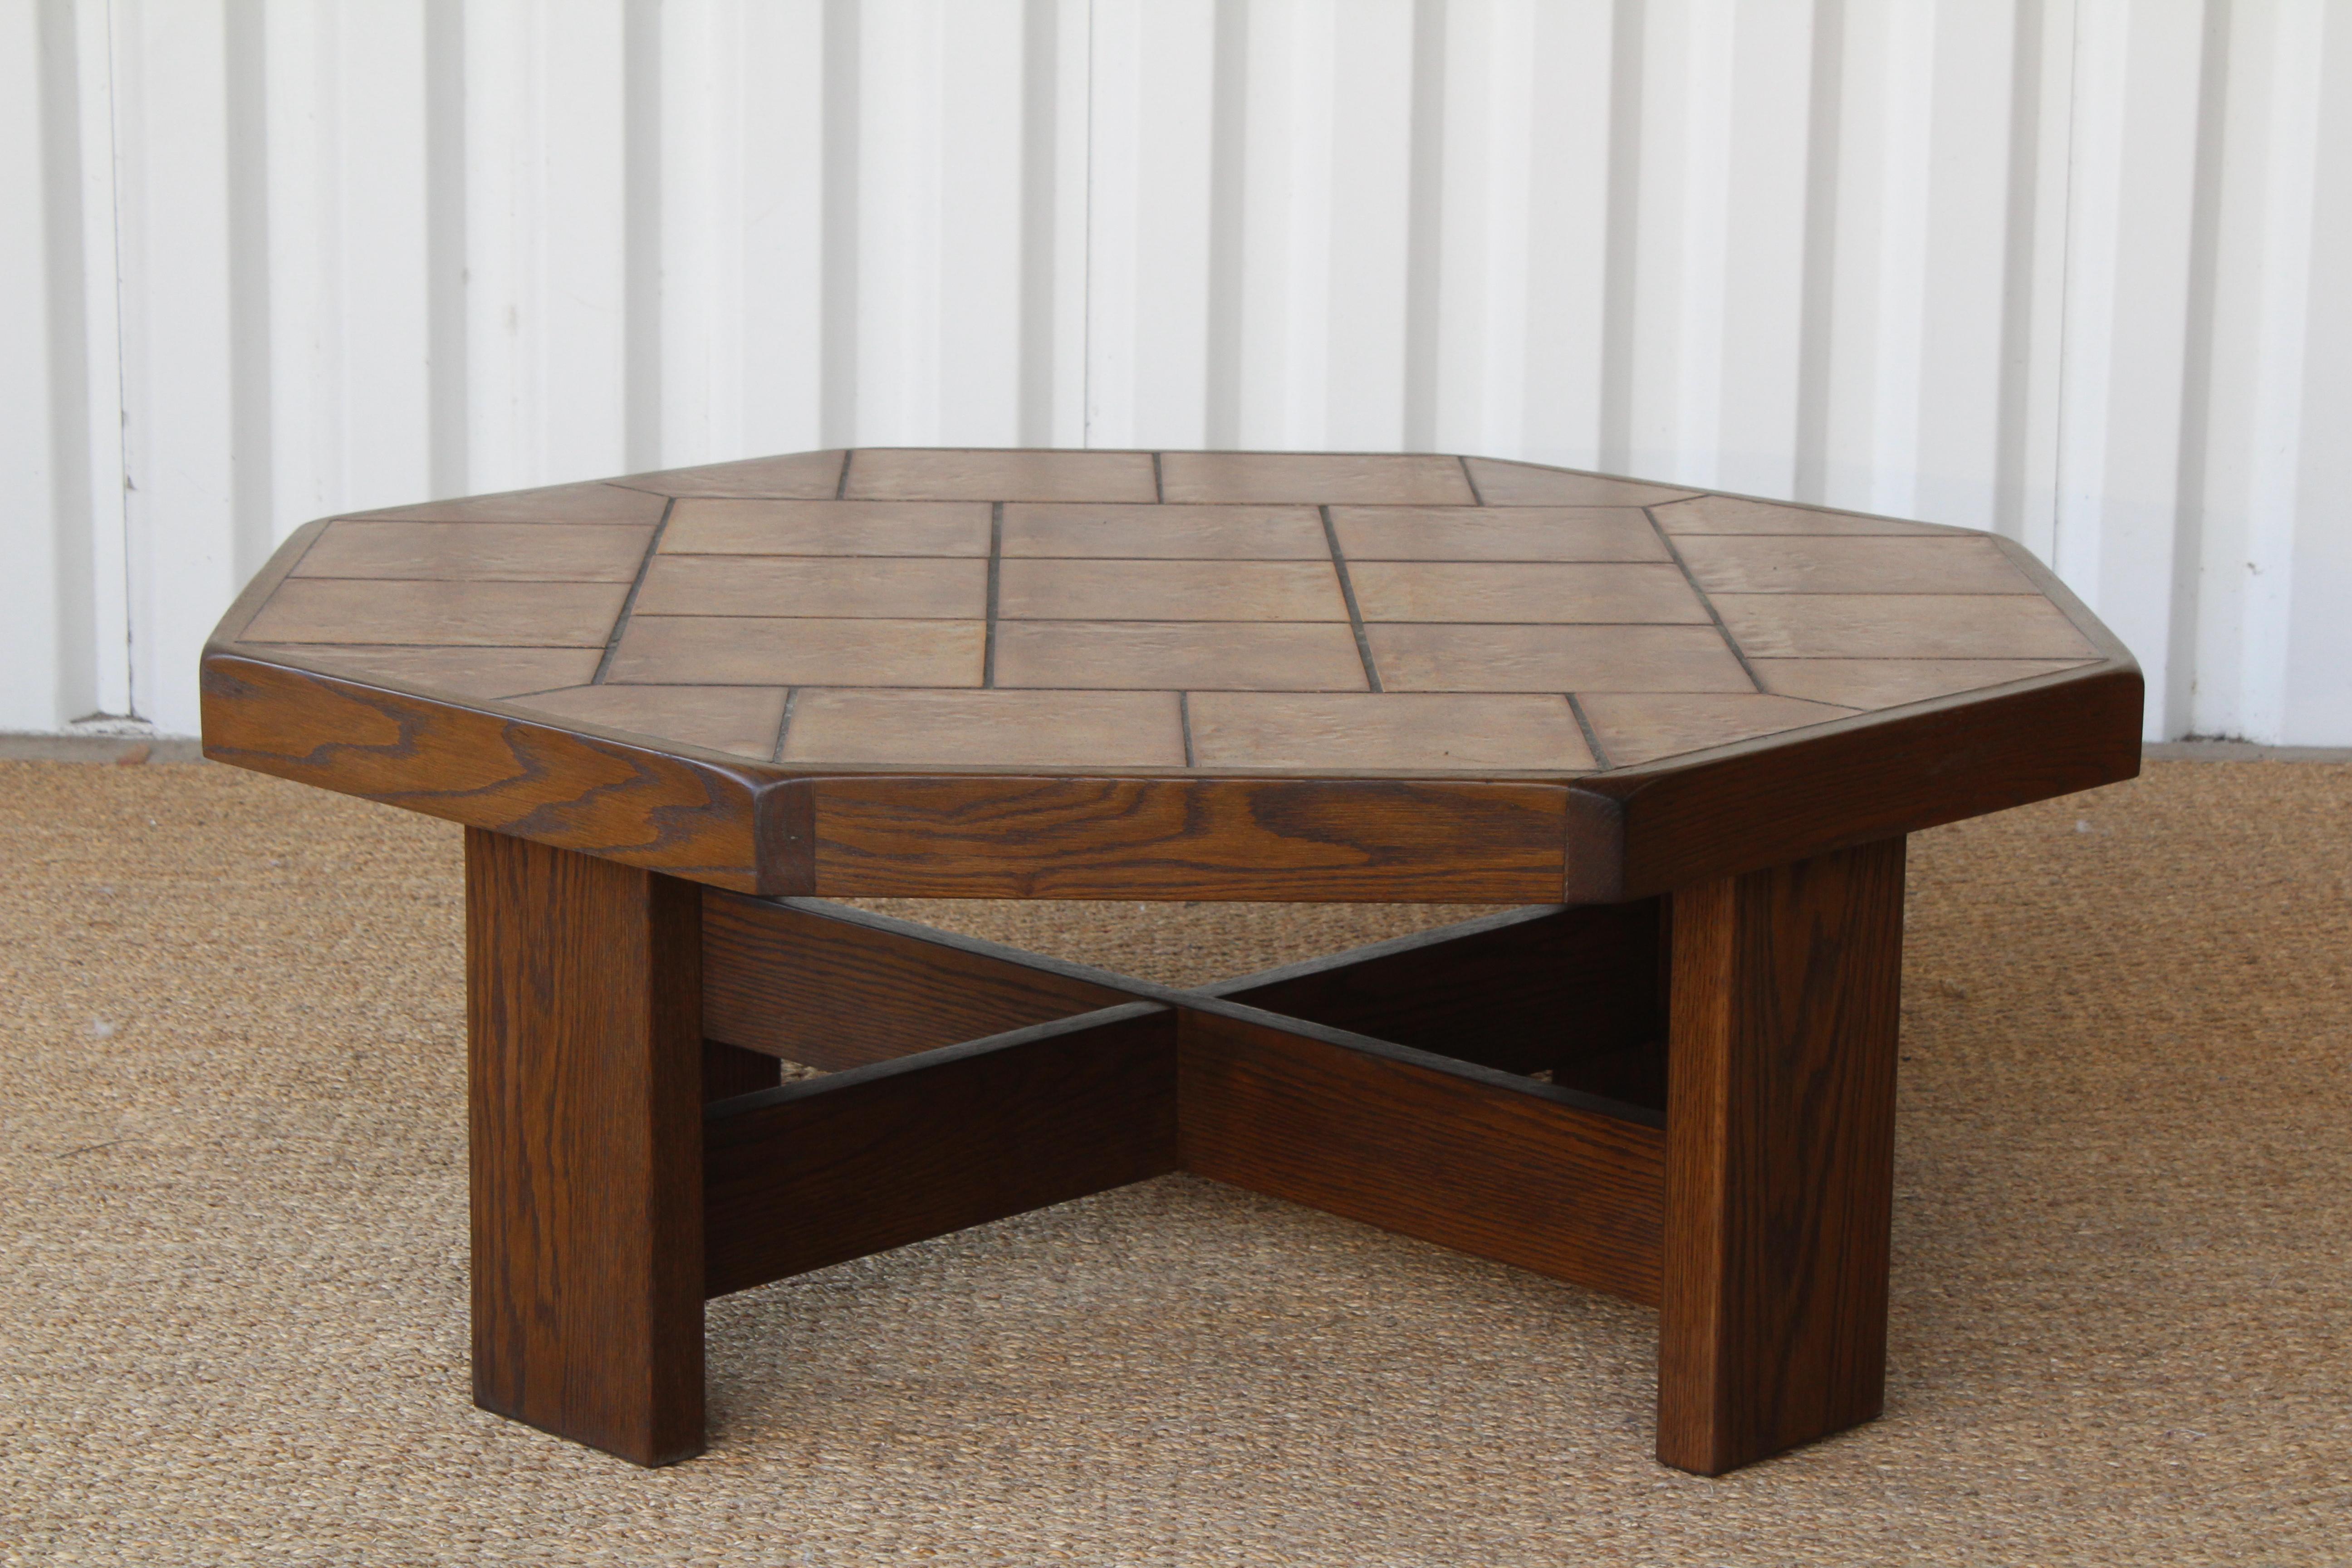 Vintage oak and ceramic tile top coffee table, France, 1970s. The oak base and frame have been refinished. Original ceramic tile top is in excellent condition. Unknown maker and designer.